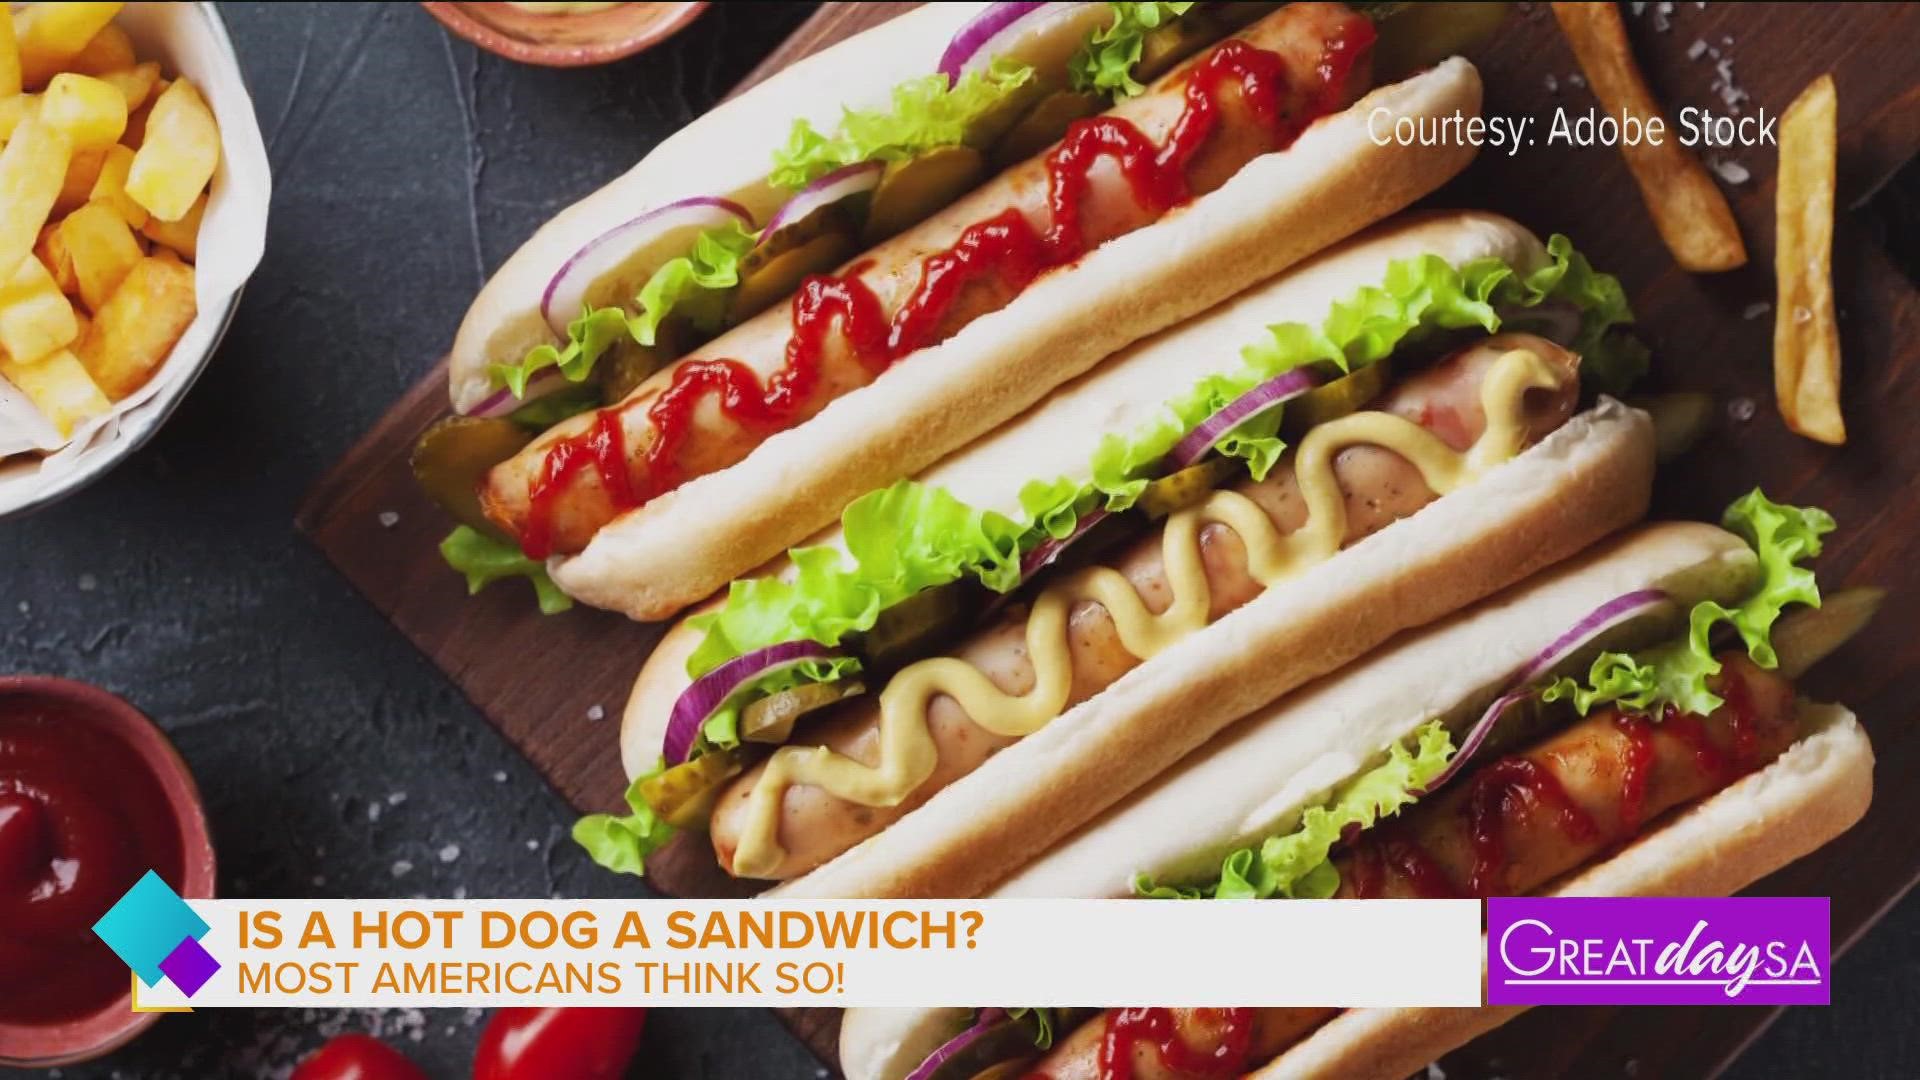 The debate continues...hot dog or sandwich?